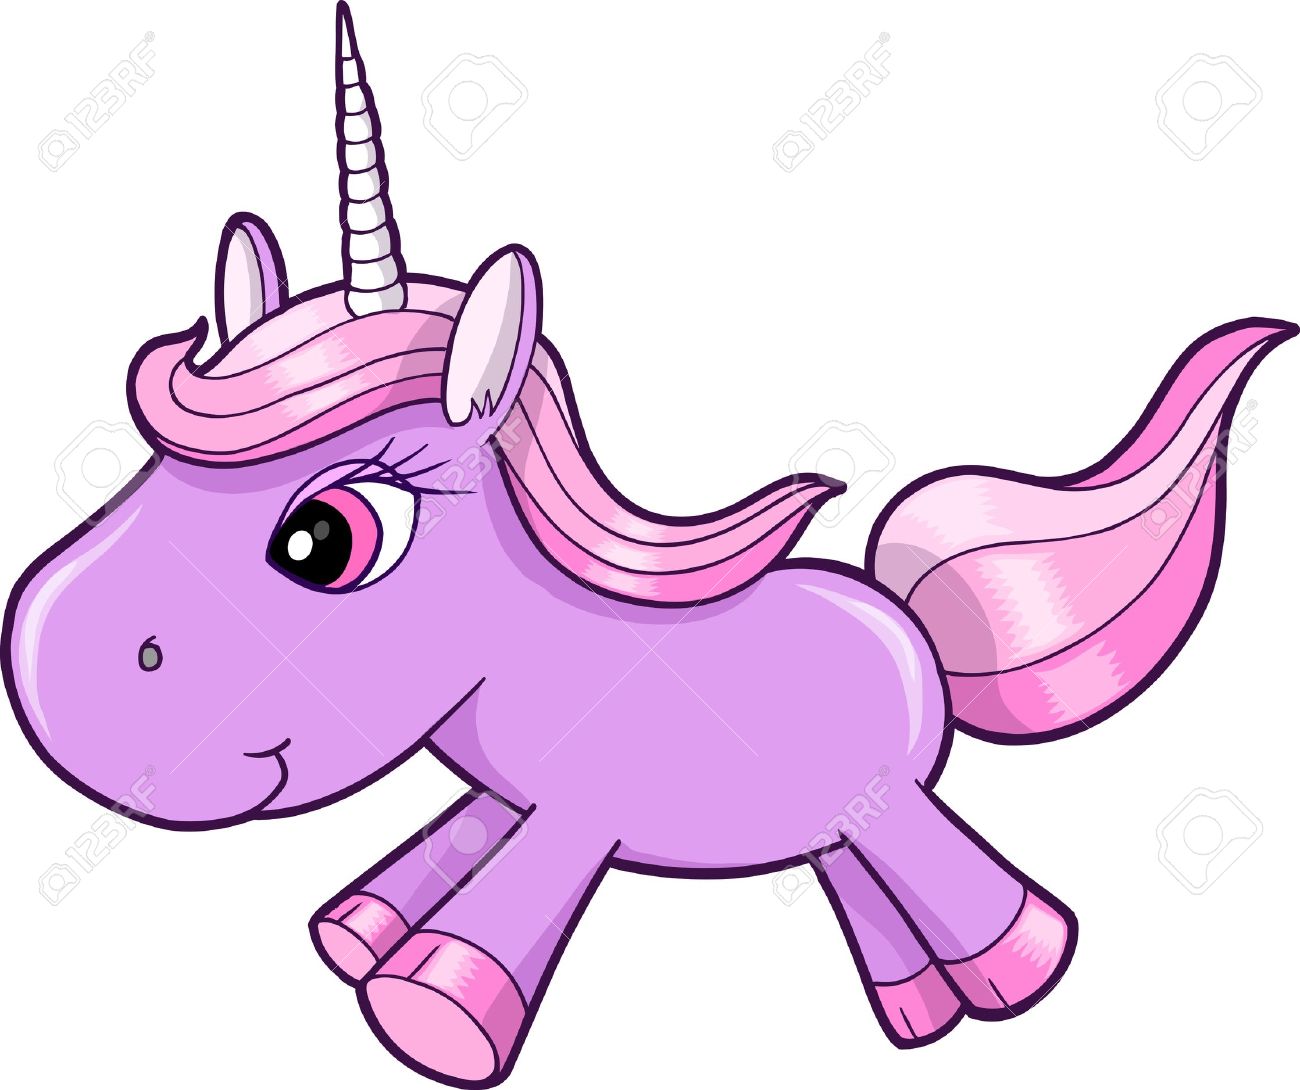 Free Baby Unicorn Cliparts, Download Free Clip Art, Free ...